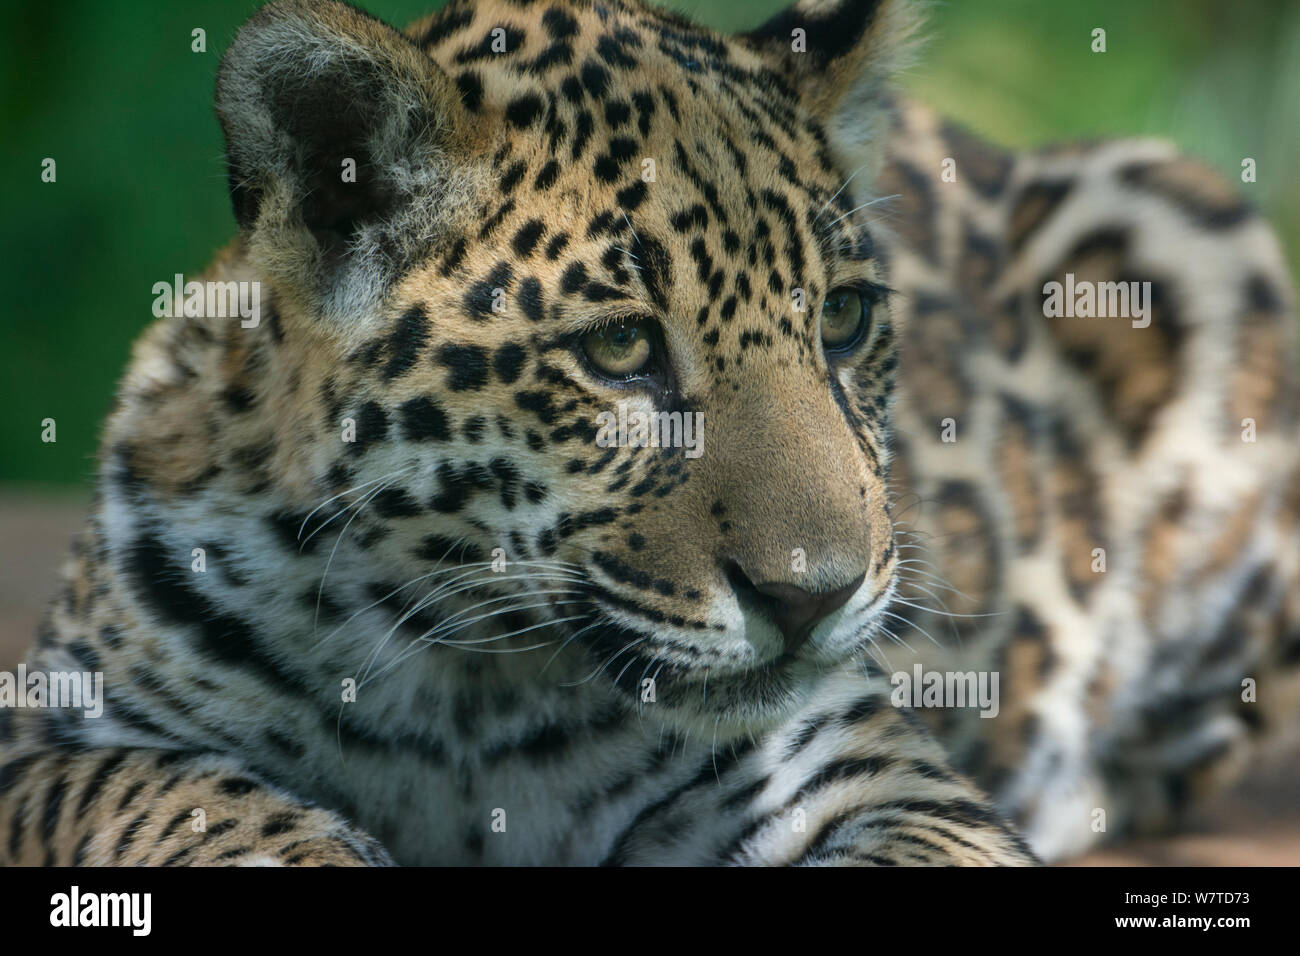 Jaguar (Panthera onca) cub, aged five months, captive, native to Southern and Central America. Stock Photo